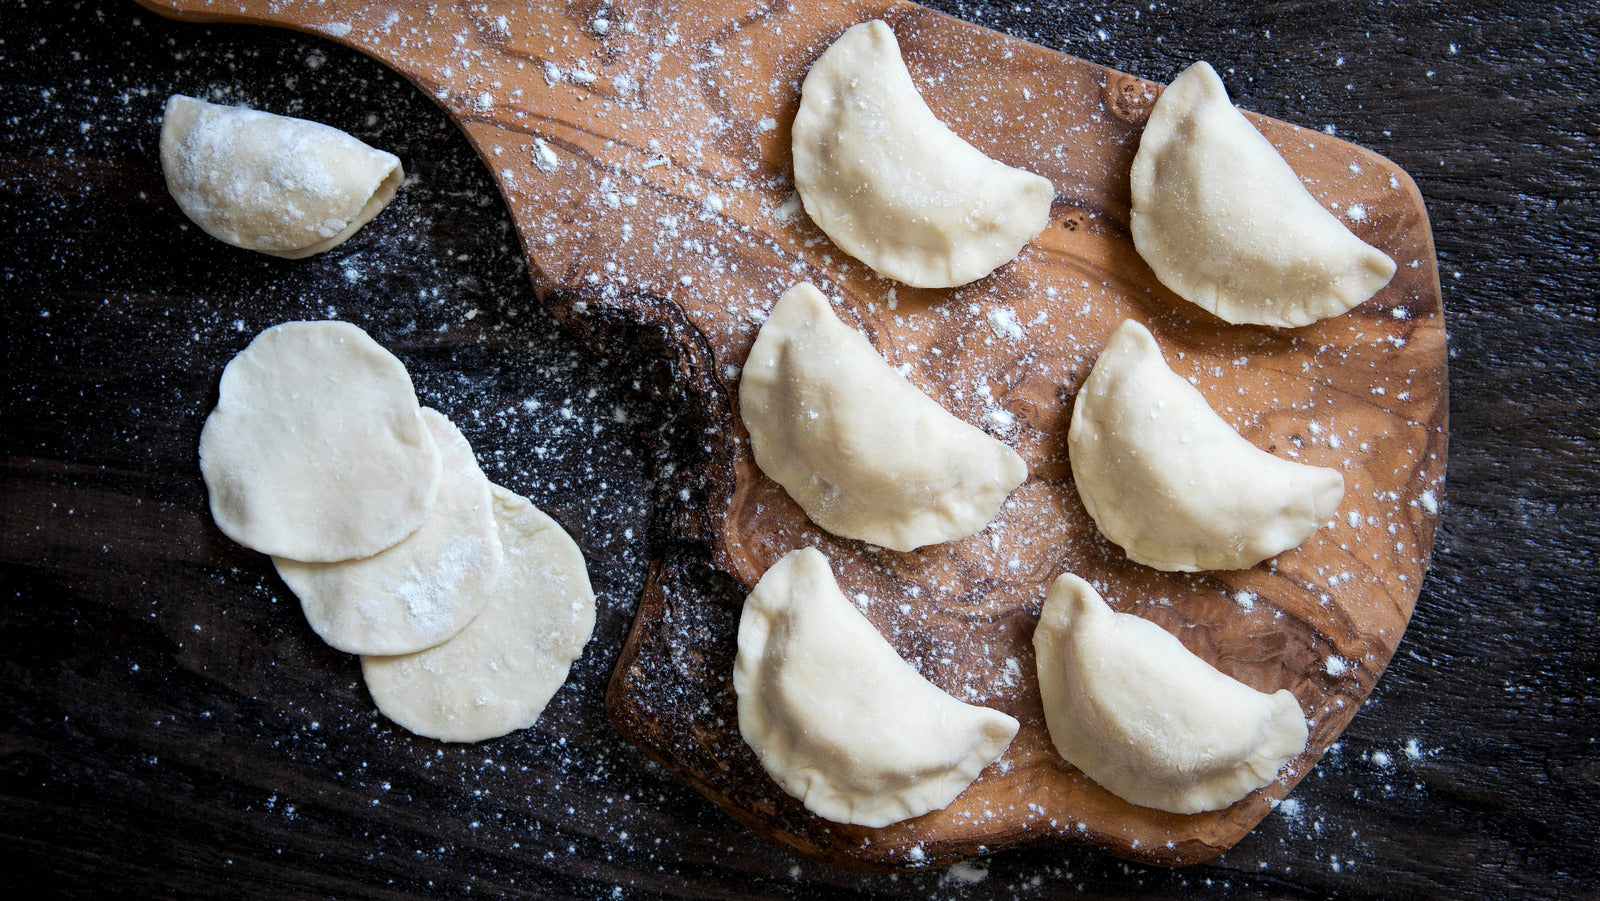 Northern Europe's Winter Dumplings Cooking Class with Chef Mara